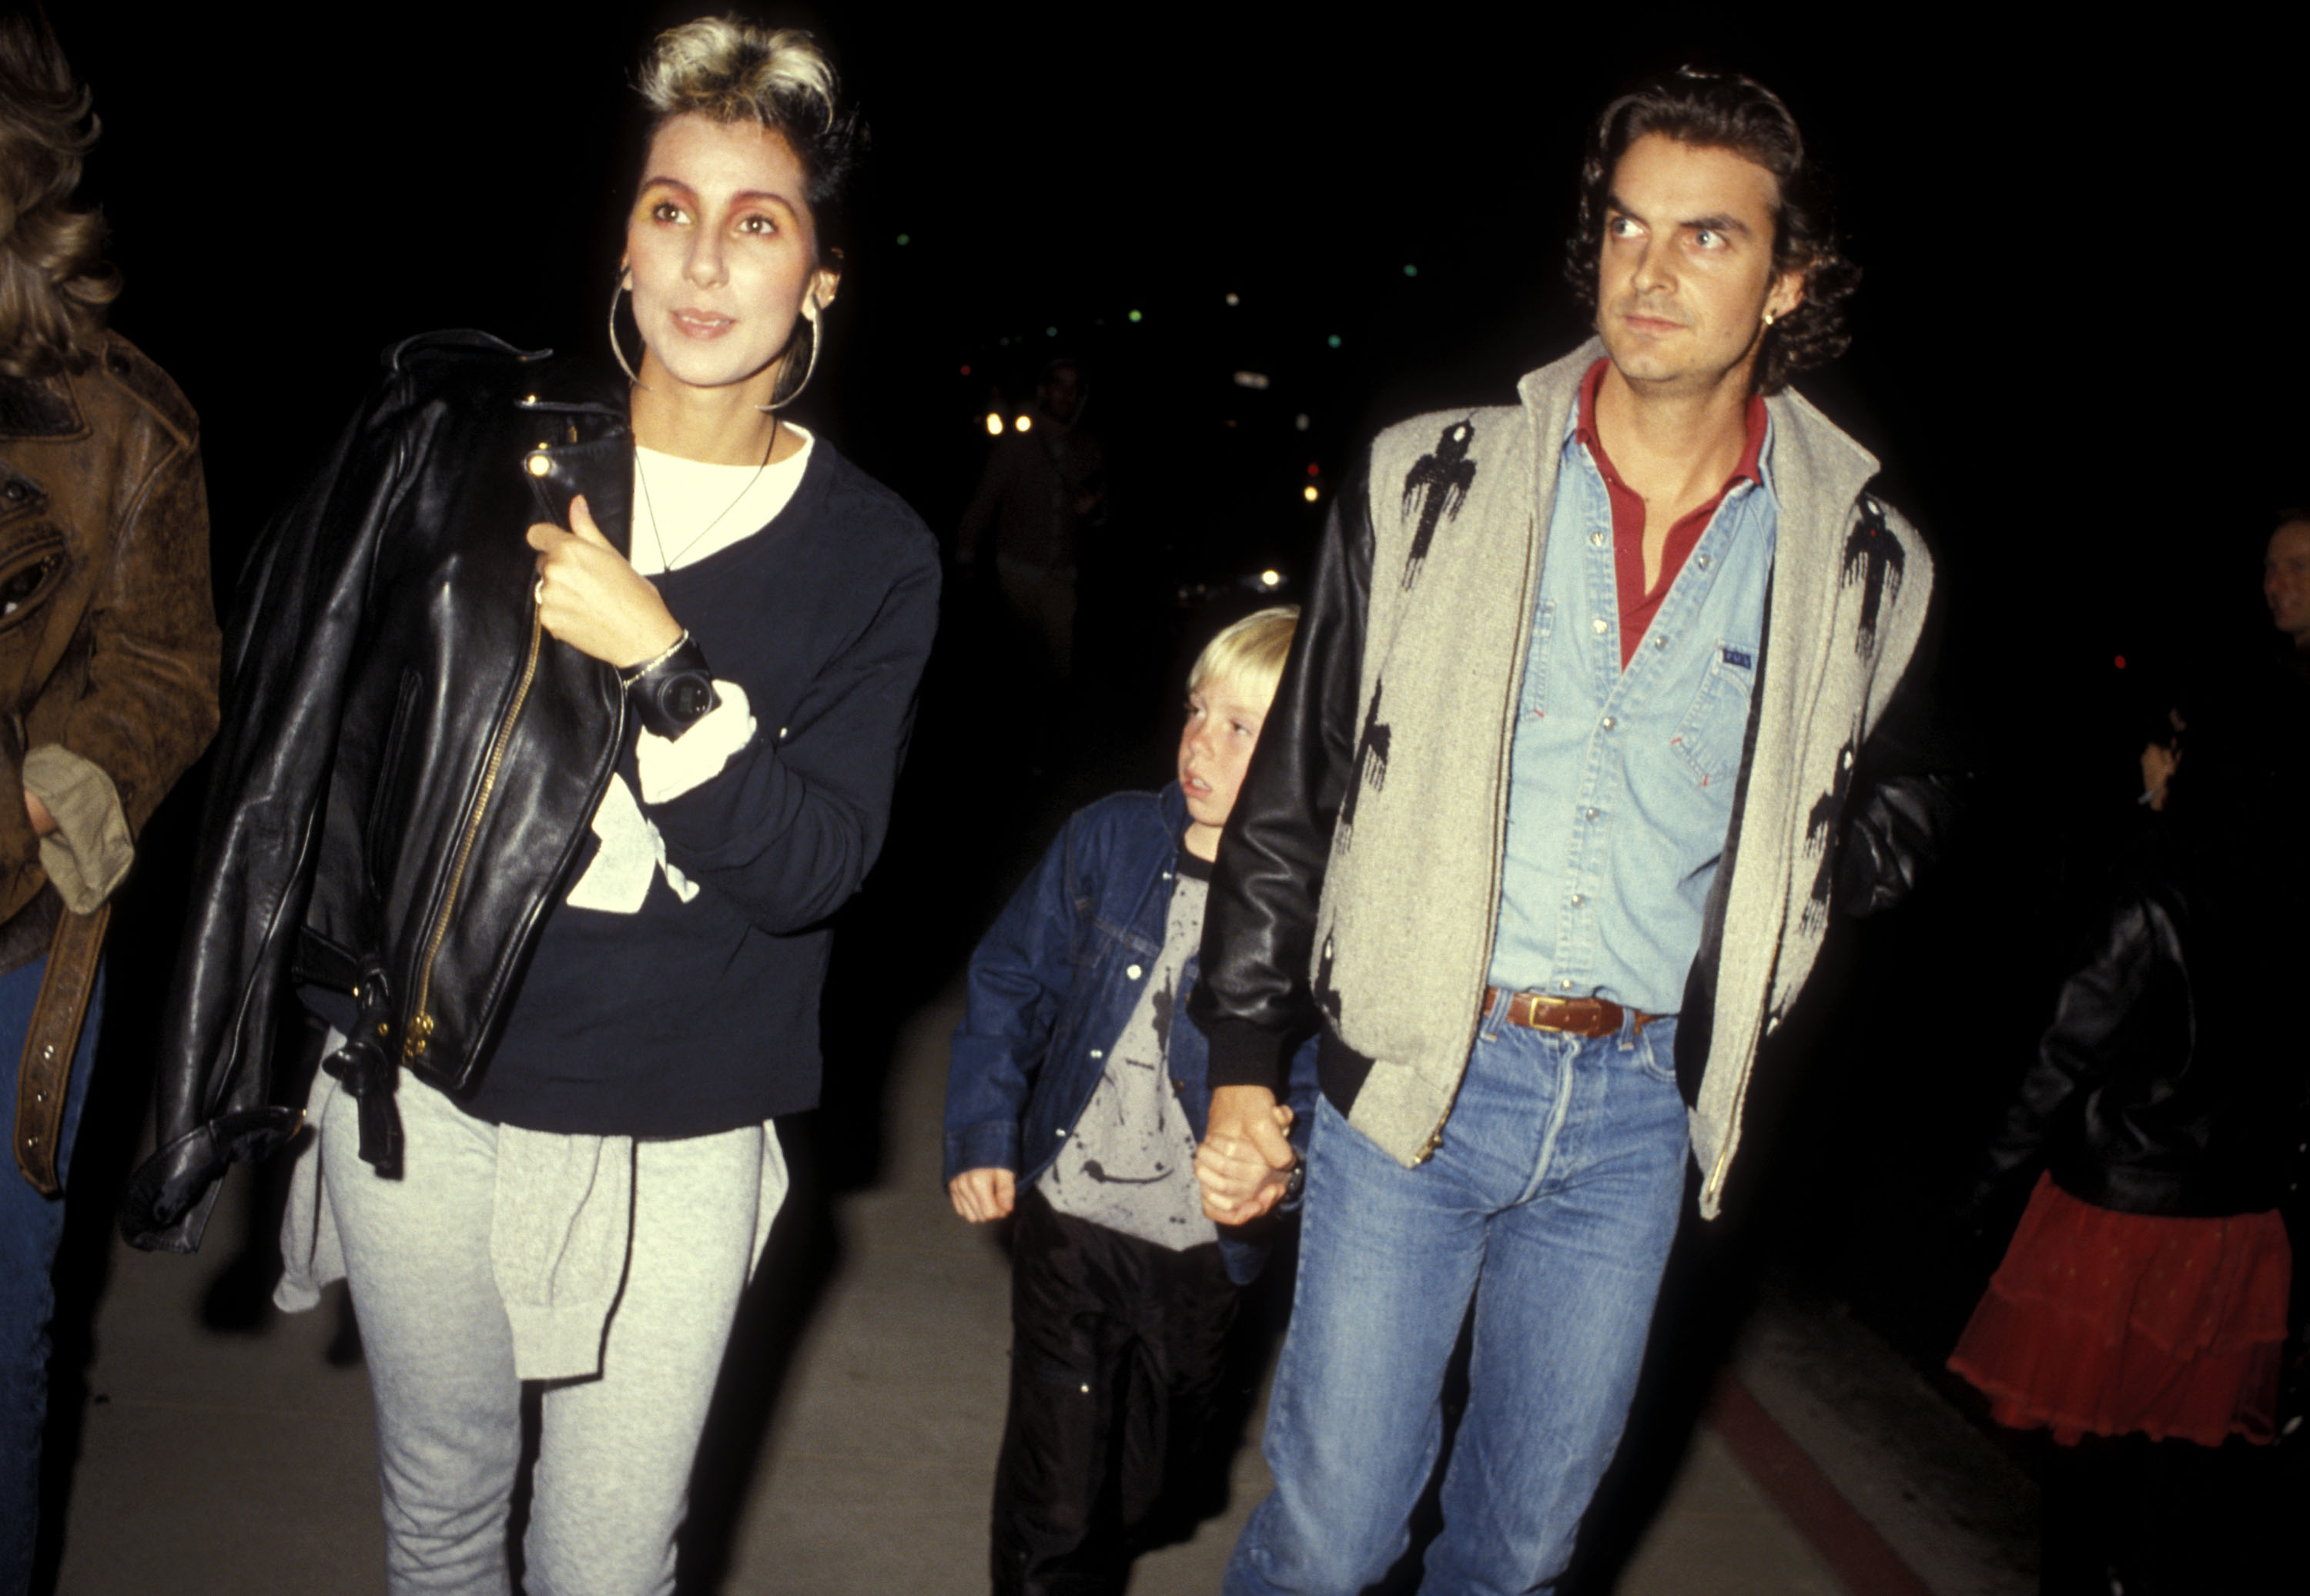 Cher, her boyfriend Josh Donen and her son Elijah Blue Allman attend "The Sure Thing" premiere on February 9, 1985 in Beverly Hills, California | Source: Getty Images